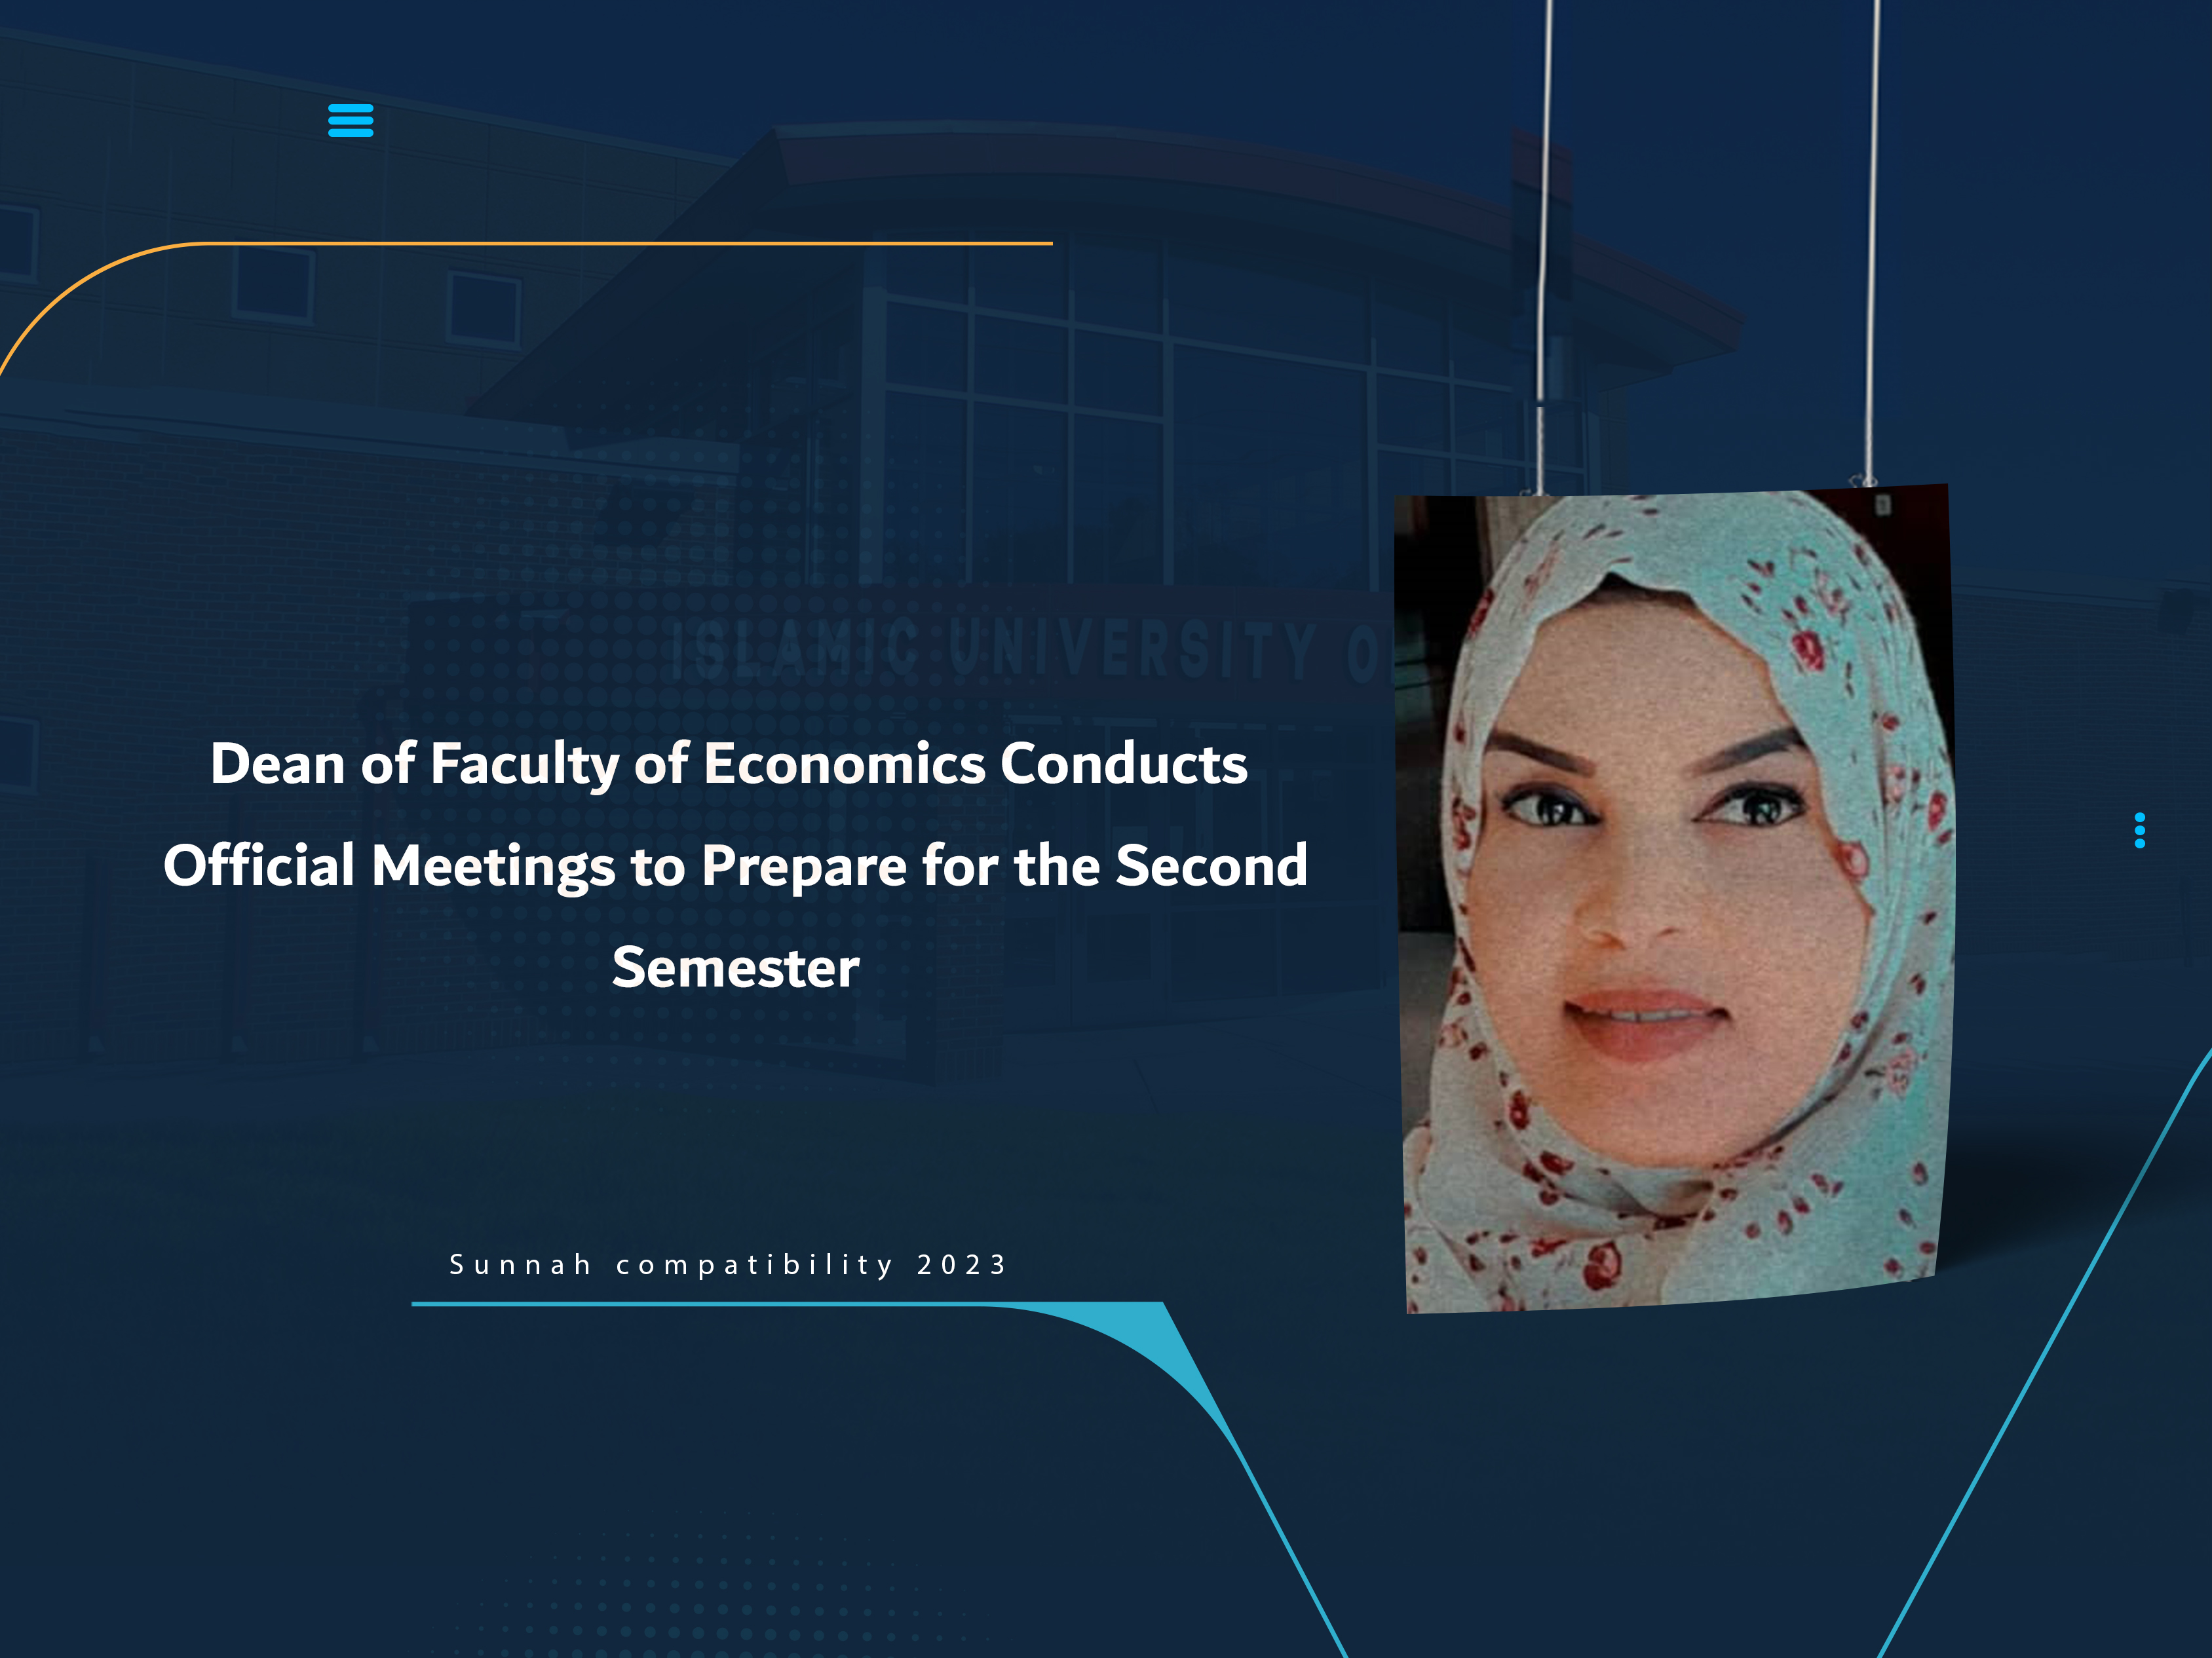 Dean of Faculty of Economics Conducts Official Meetings to Prepare for the Second Semester